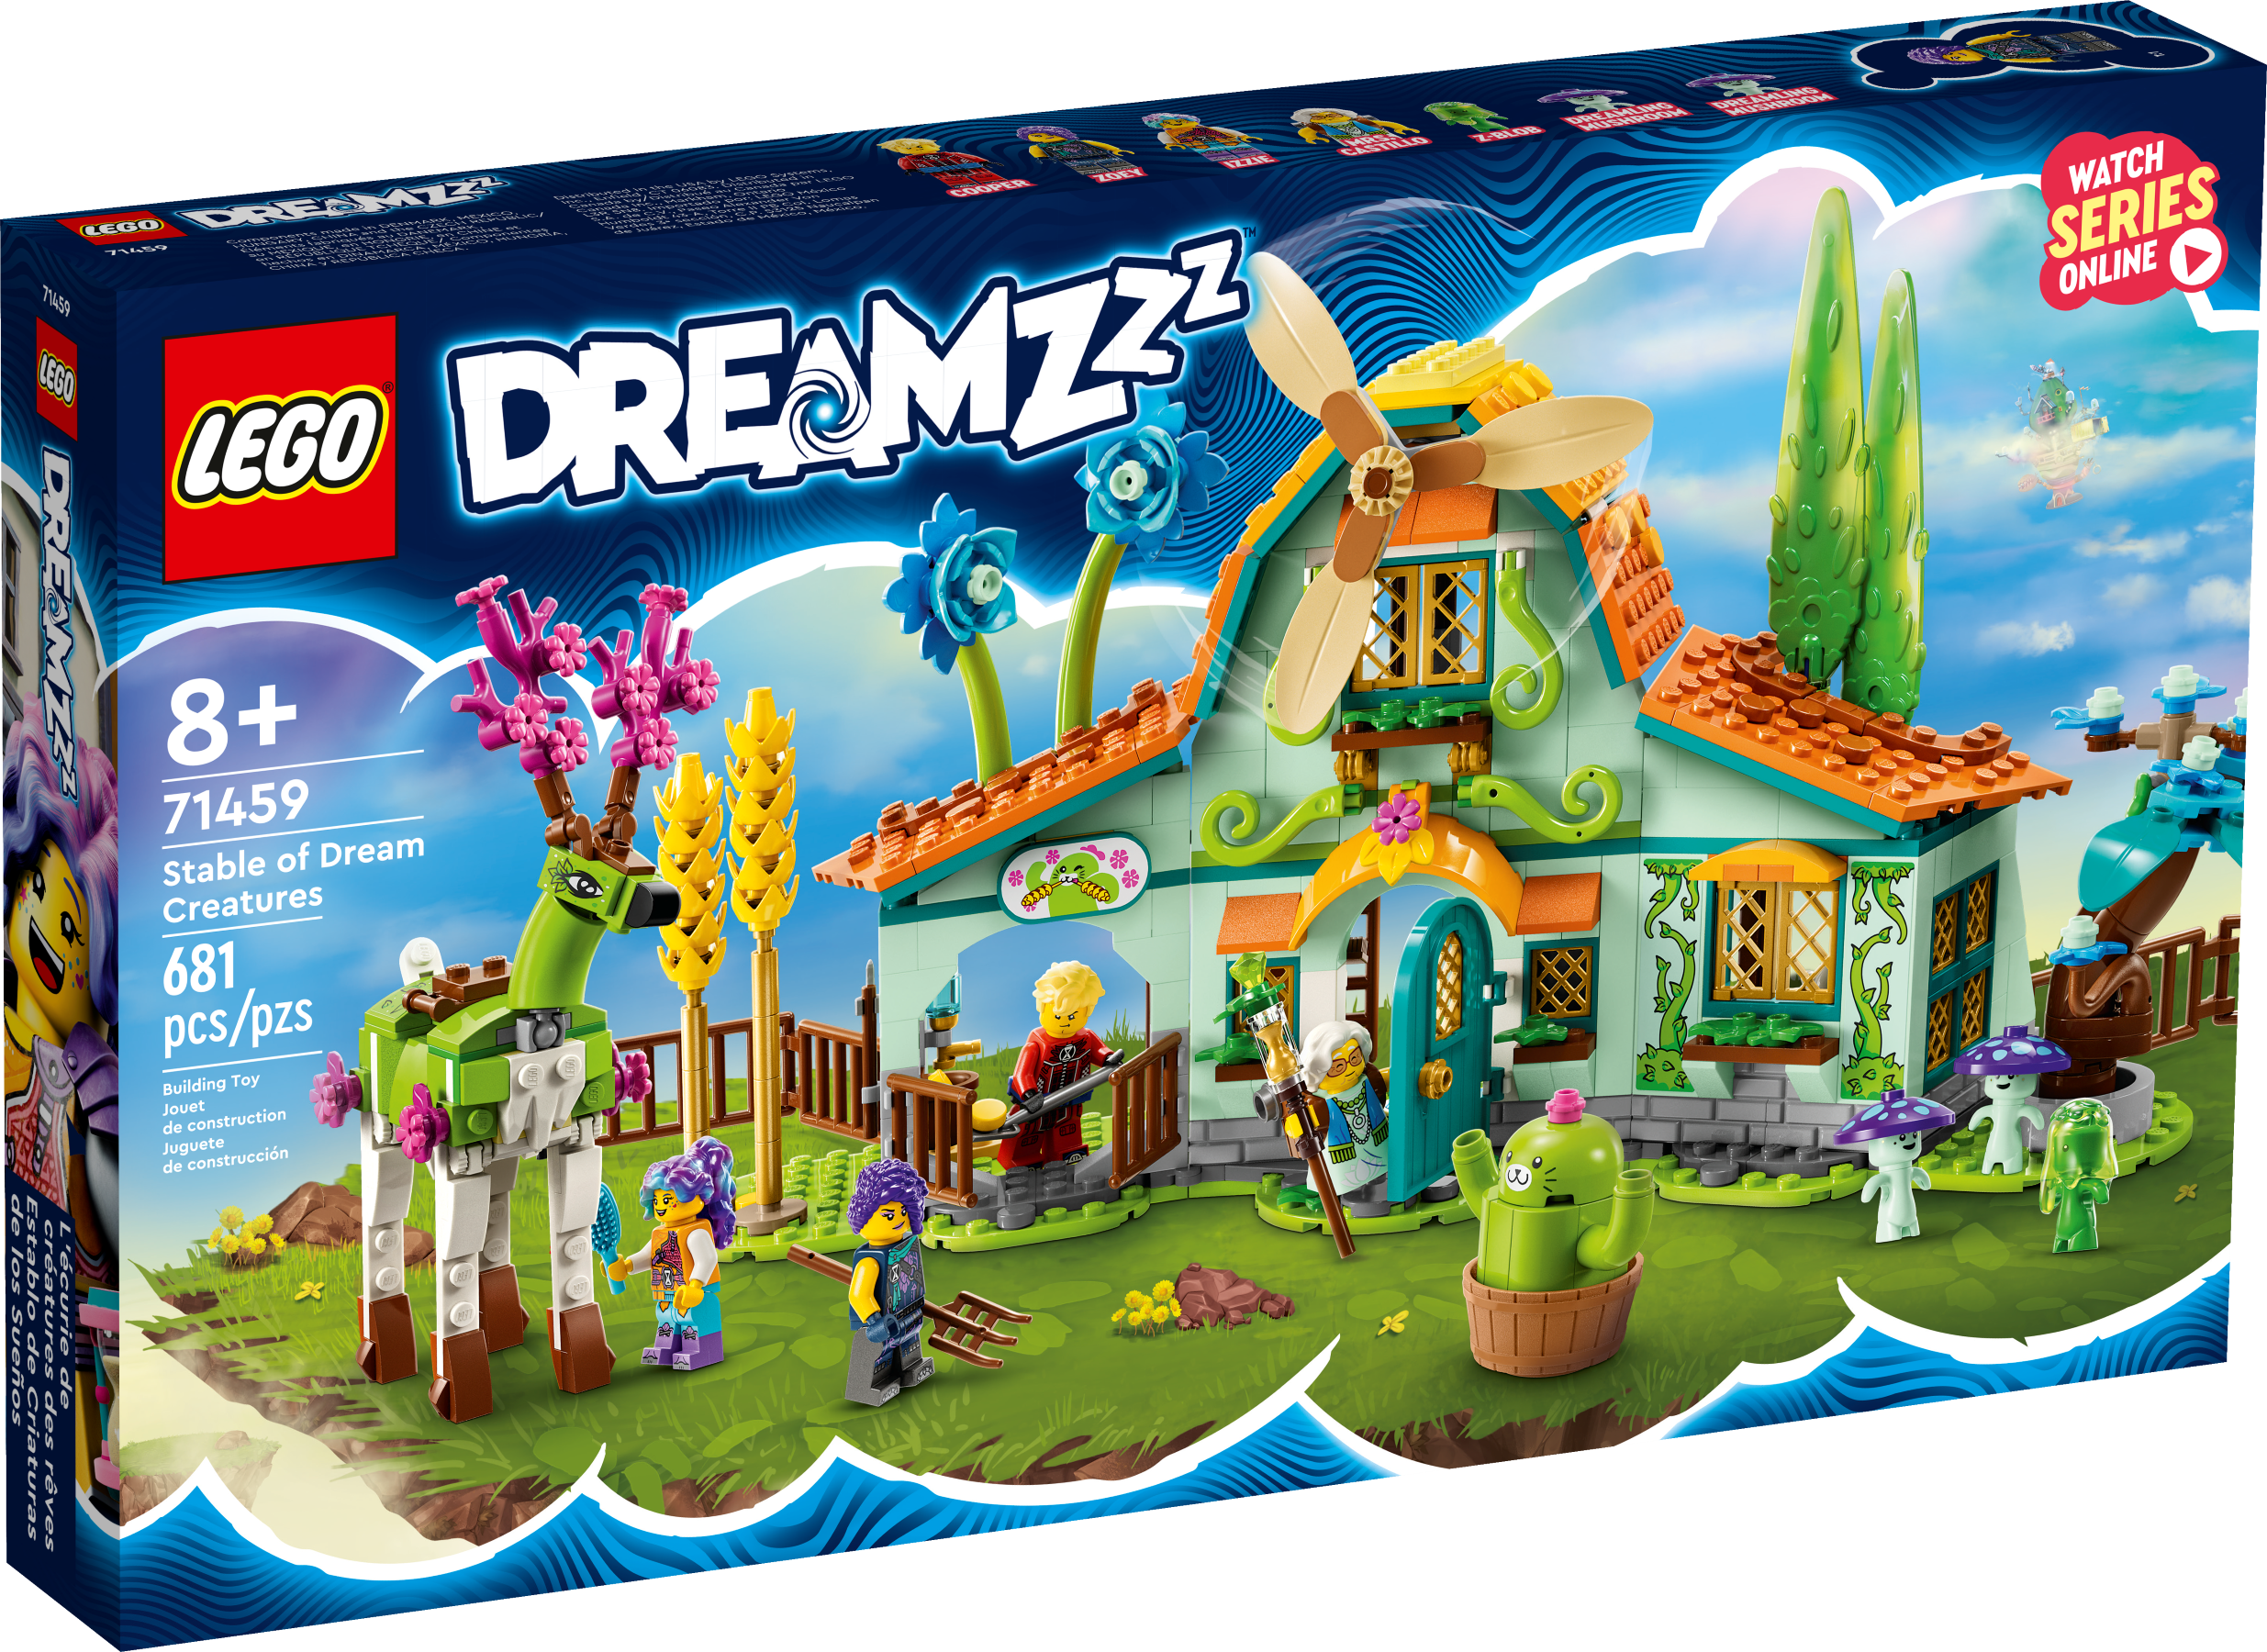 Discover the new LEGO® DREAMZzz™ TV series! - LEGO® GB